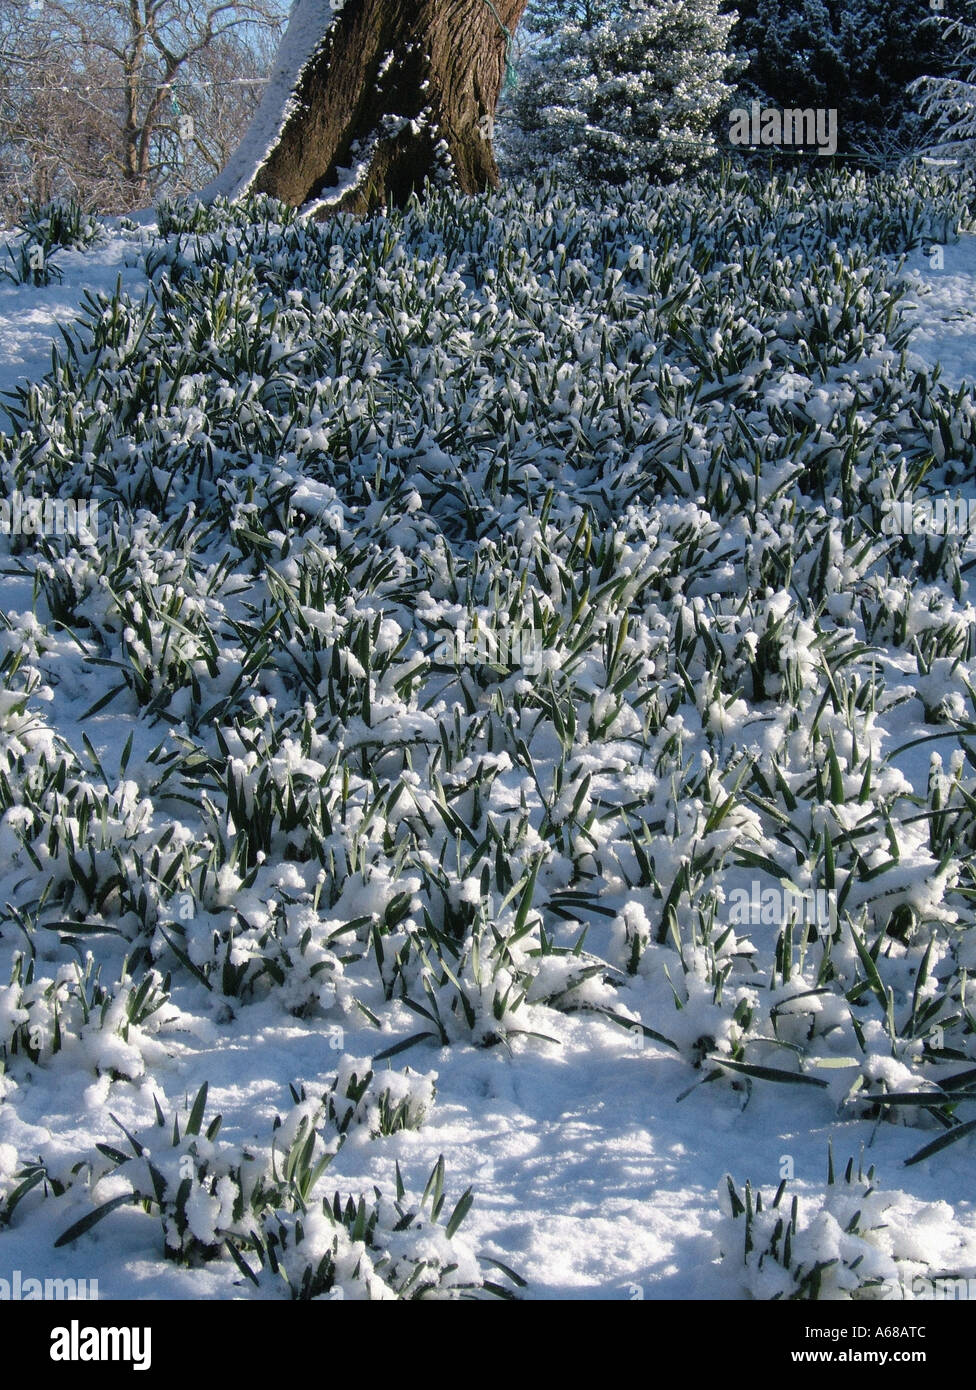 Strap-like leaves of the Galanthus emerging through the snow. Stock Photo